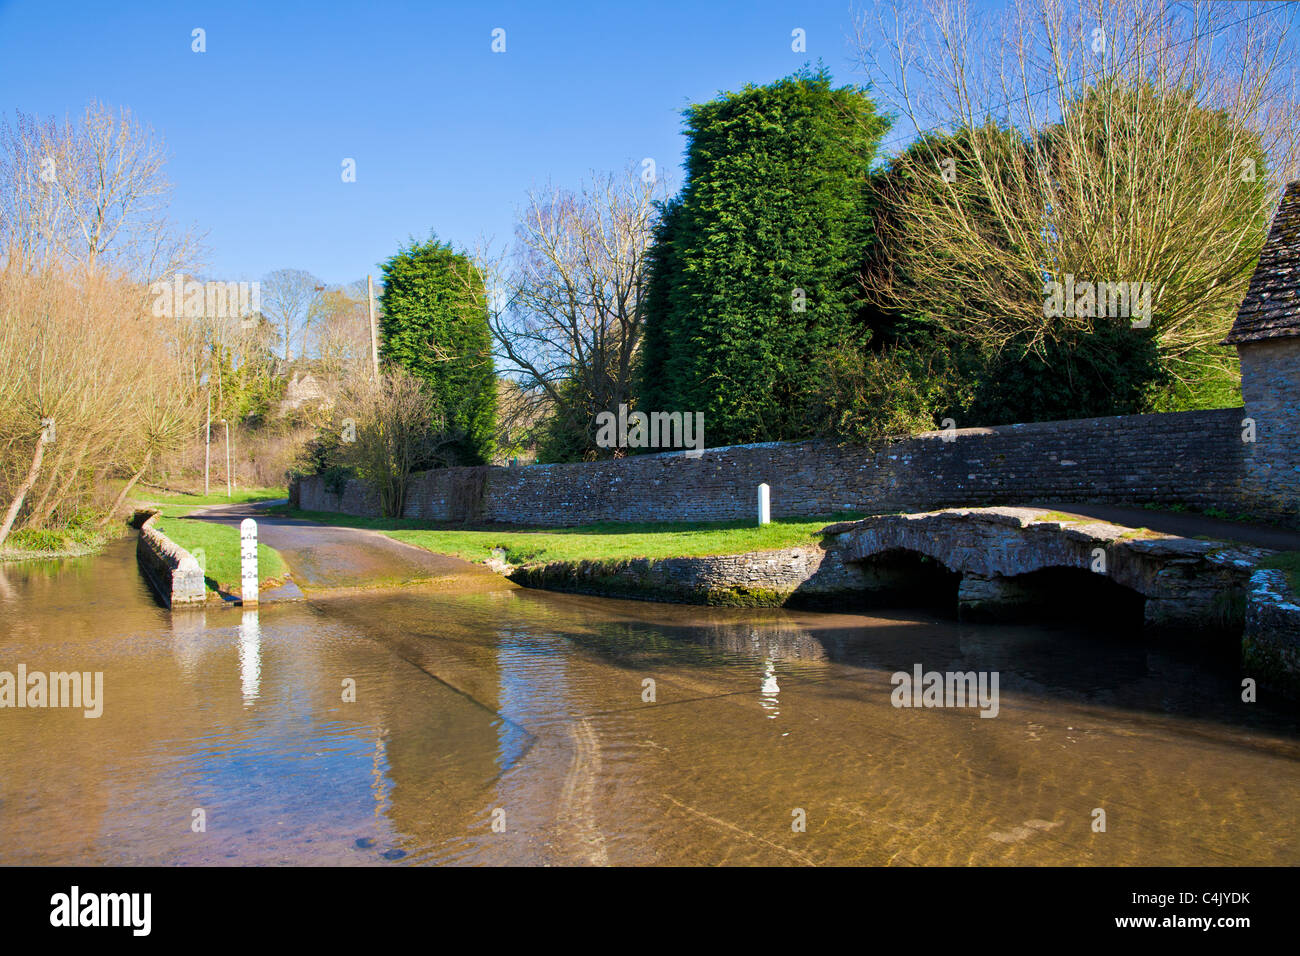 The ford in the pretty Cotswold village of Shilton, Oxfordshire, England, UK on a sunny day in early spring Stock Photo